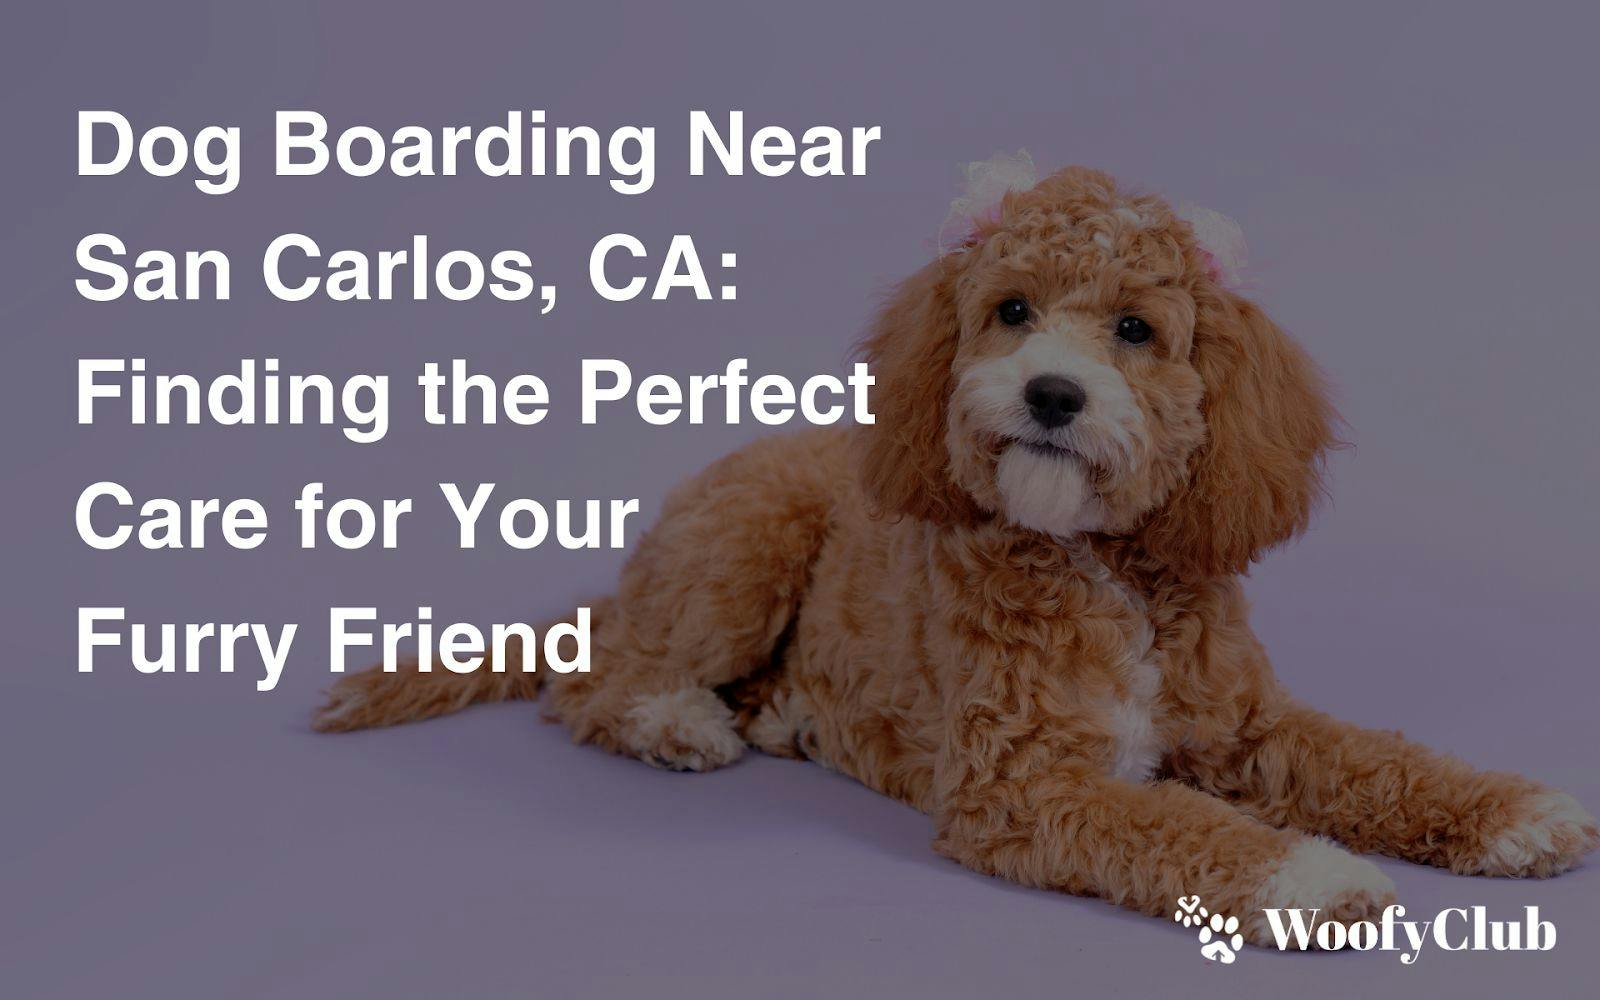 Dog Boarding Near San Carlos, CA: Finding The Perfect Care For Your Furry Friend